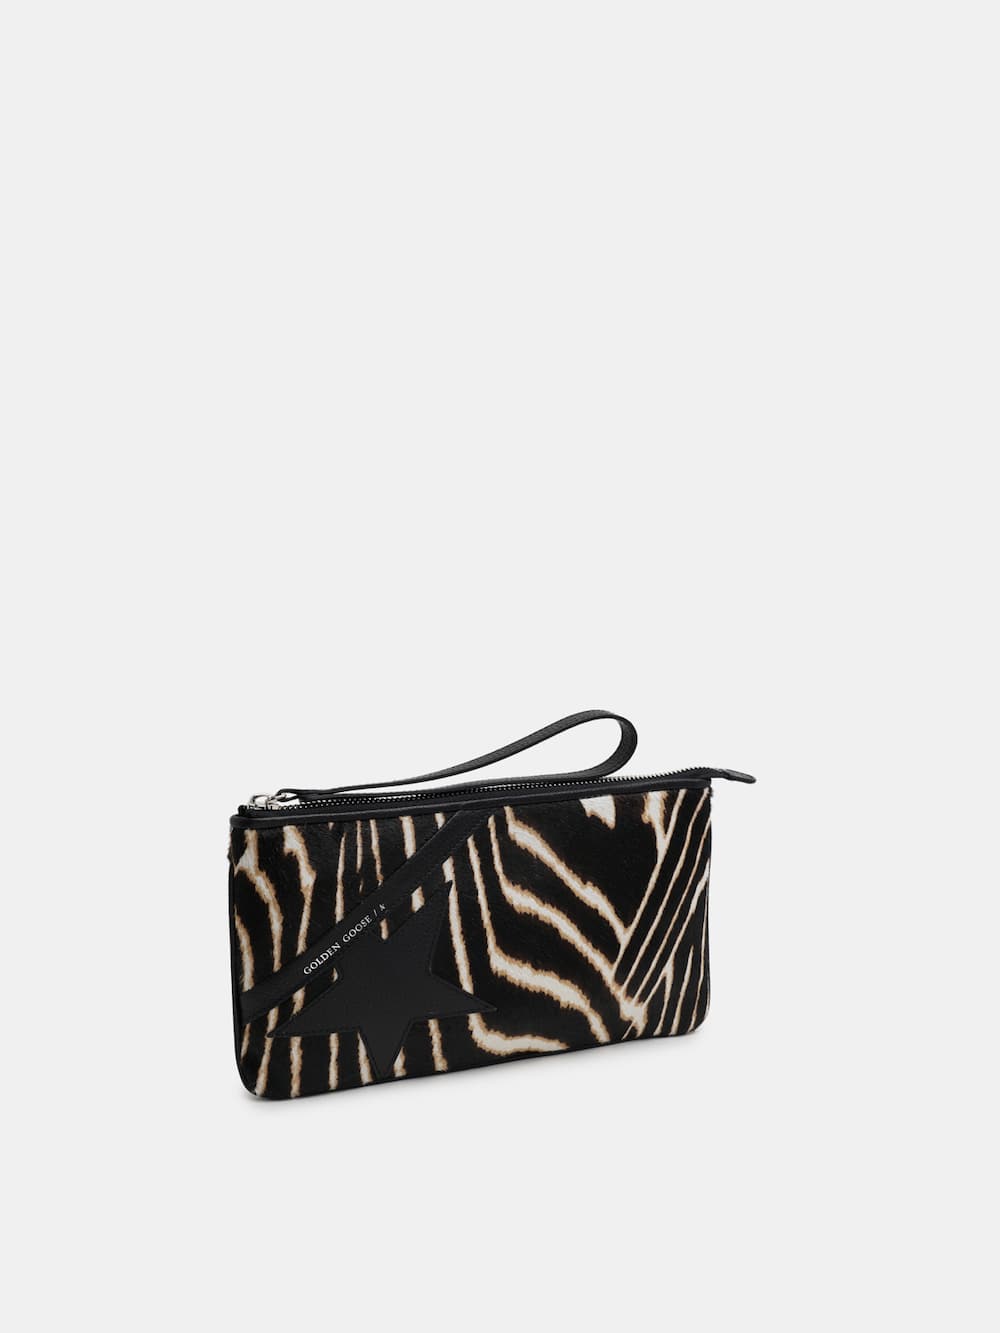 Golden Goose - Star Wrist clutch bag made of zebra print pony-effect leather in 